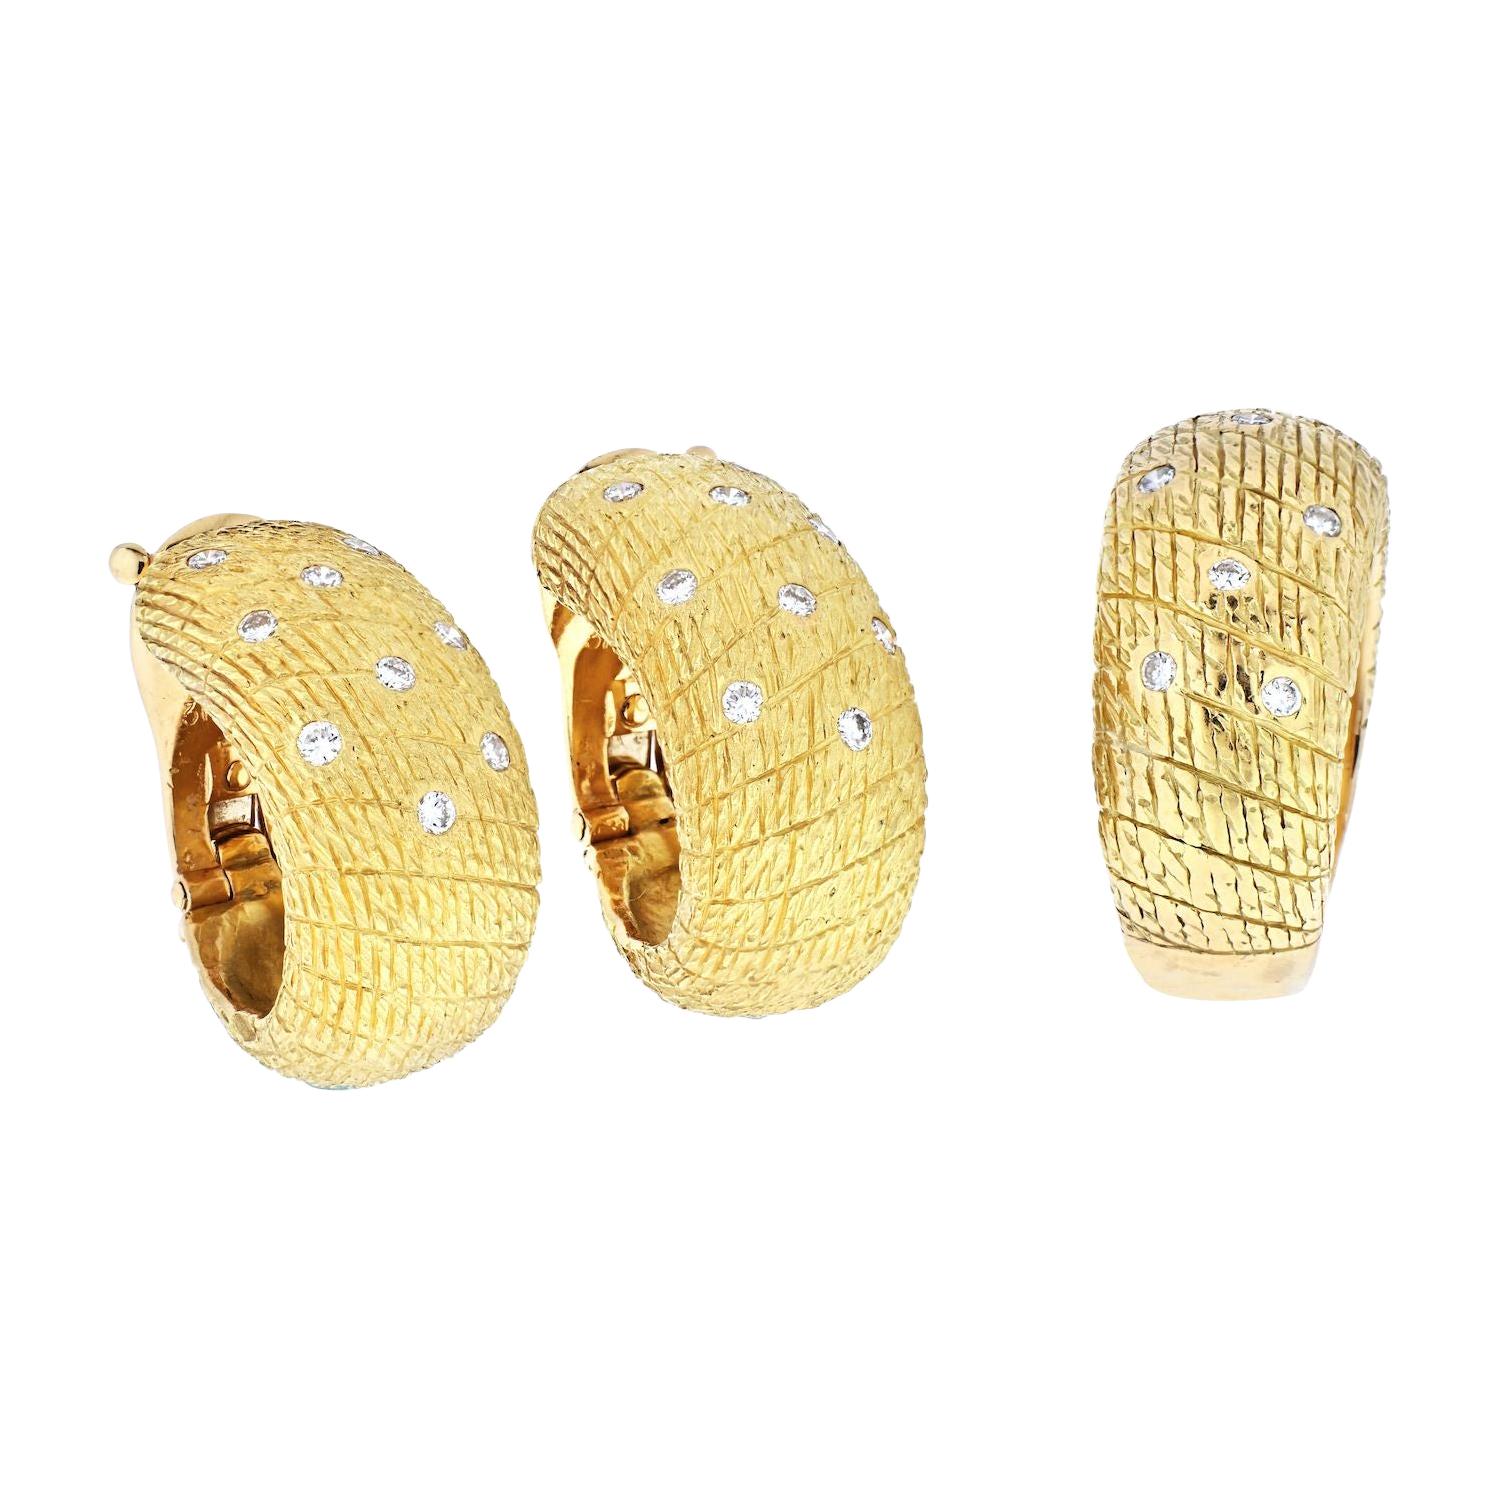 Van Cleef & Arpels 18k Yellow Gold1970's Diamond Earrings and a Ring Jewelry Set